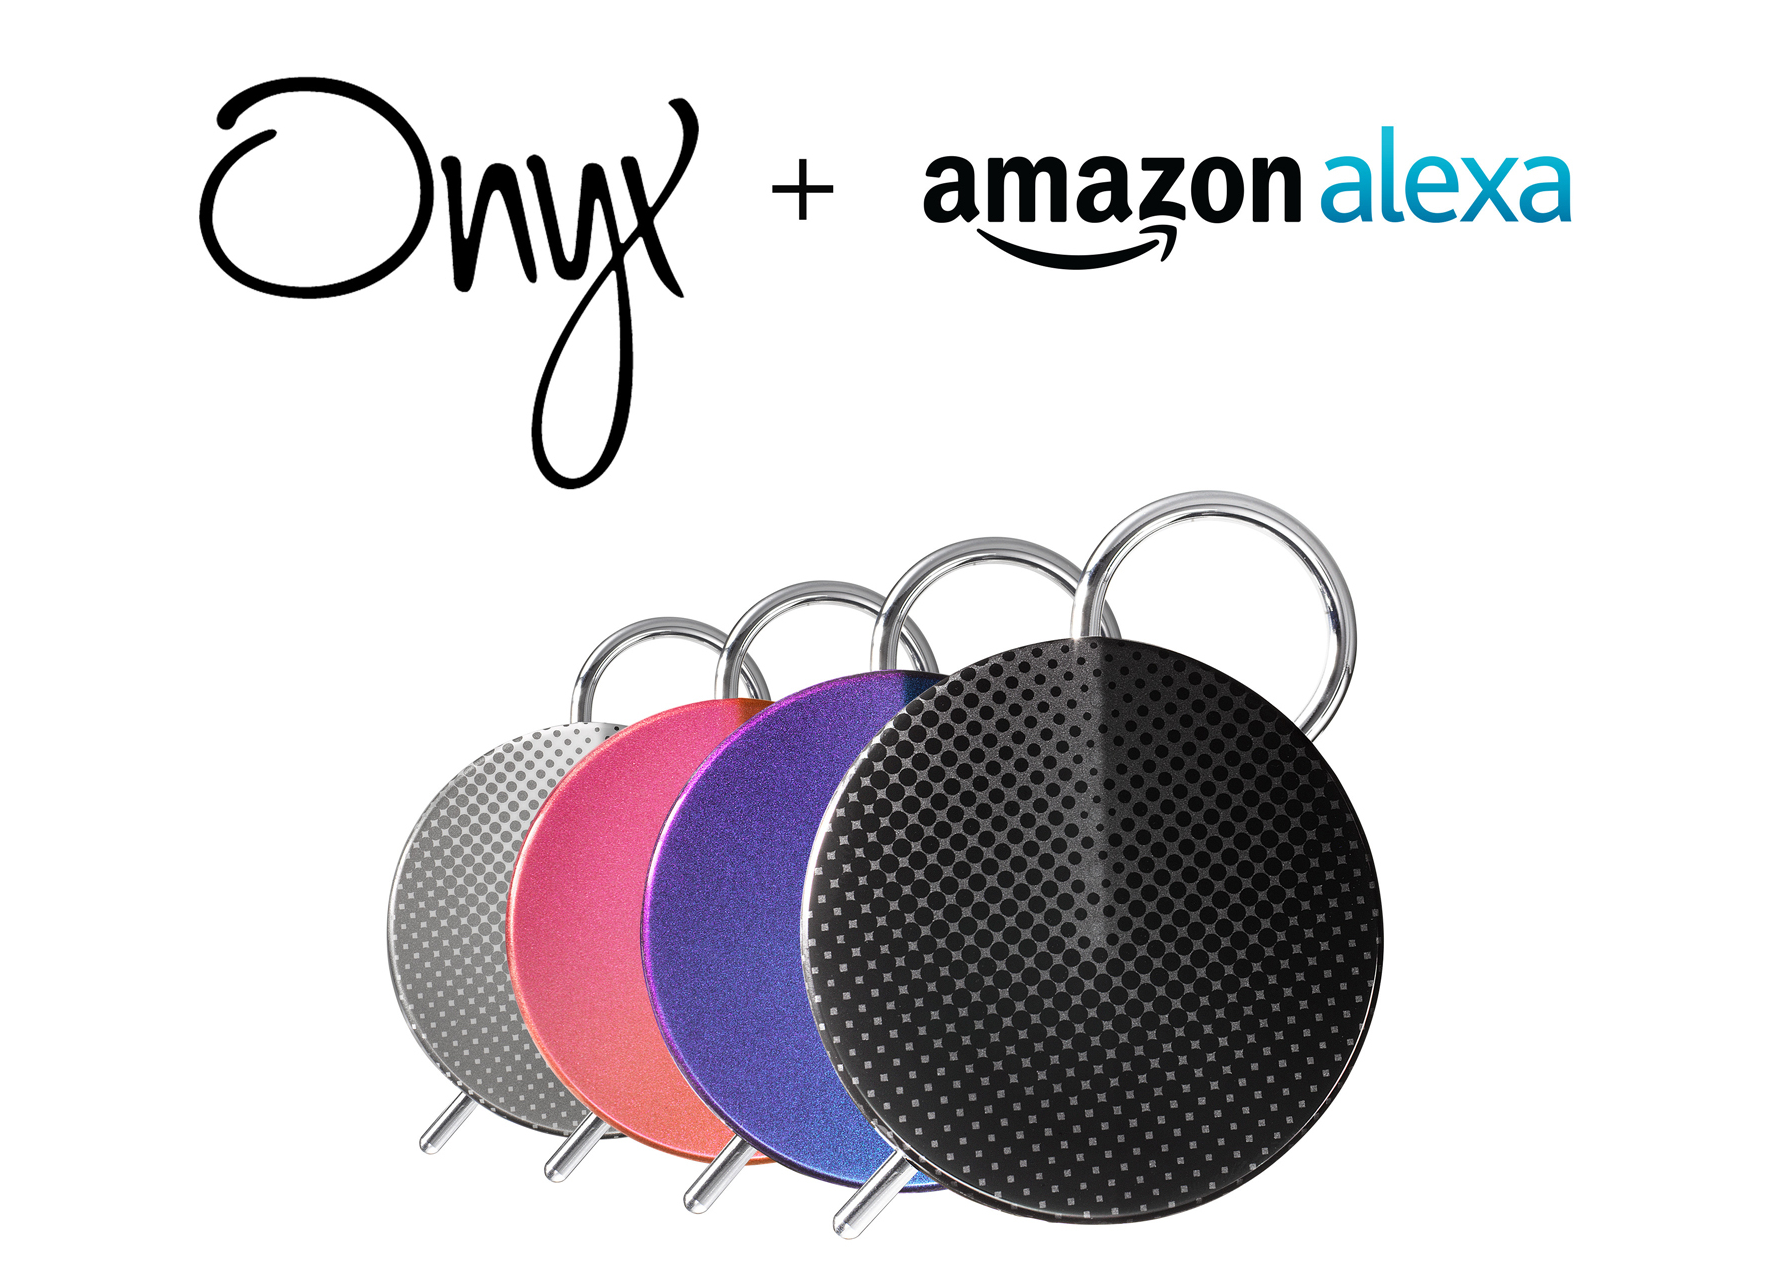 The Verge – Orion Labs Announces Alexa Integration for Onyx Device